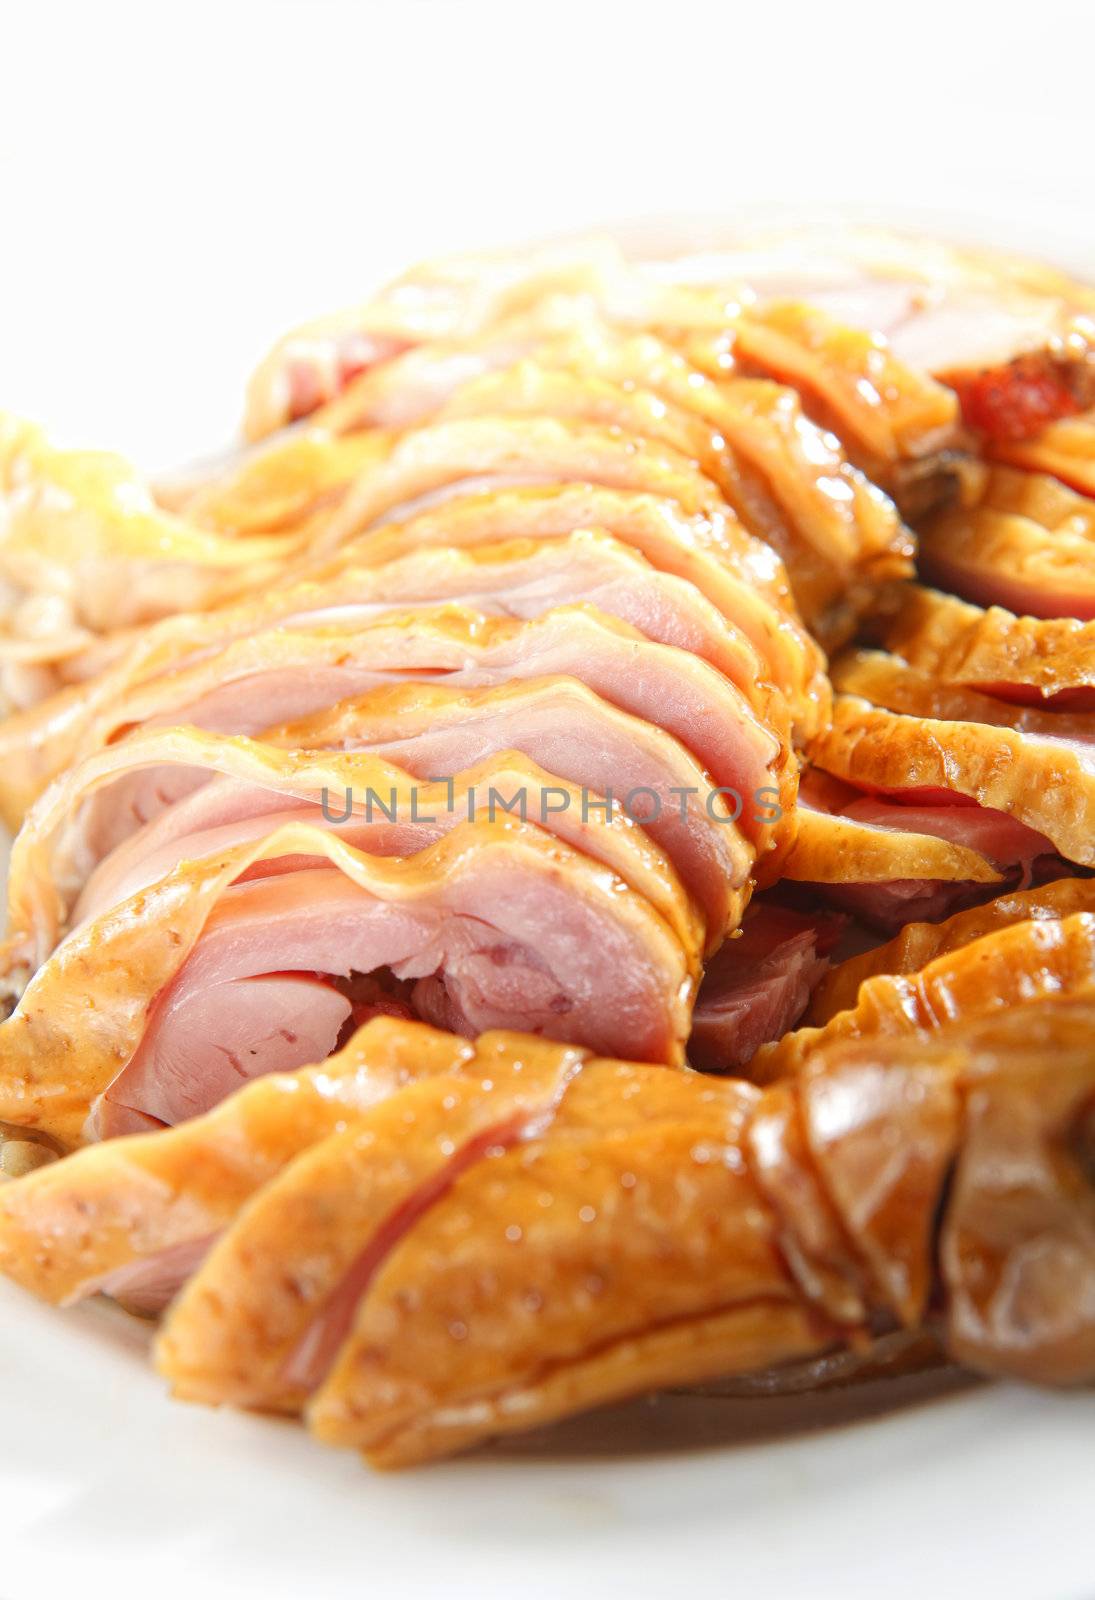 Sliced duck meat on the dish.